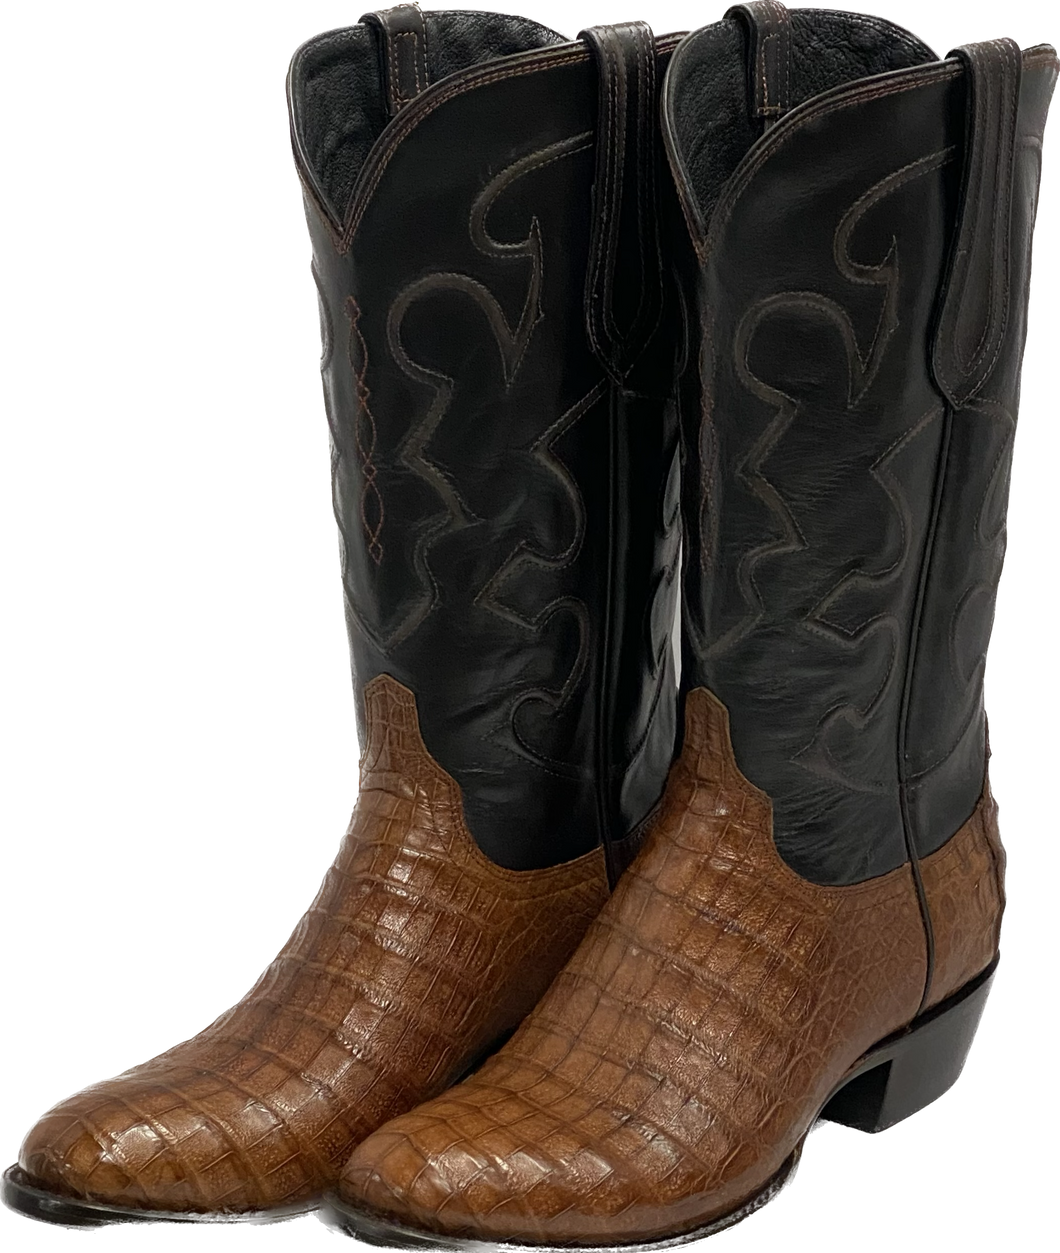 Lucchese - Charles - M1635.R4